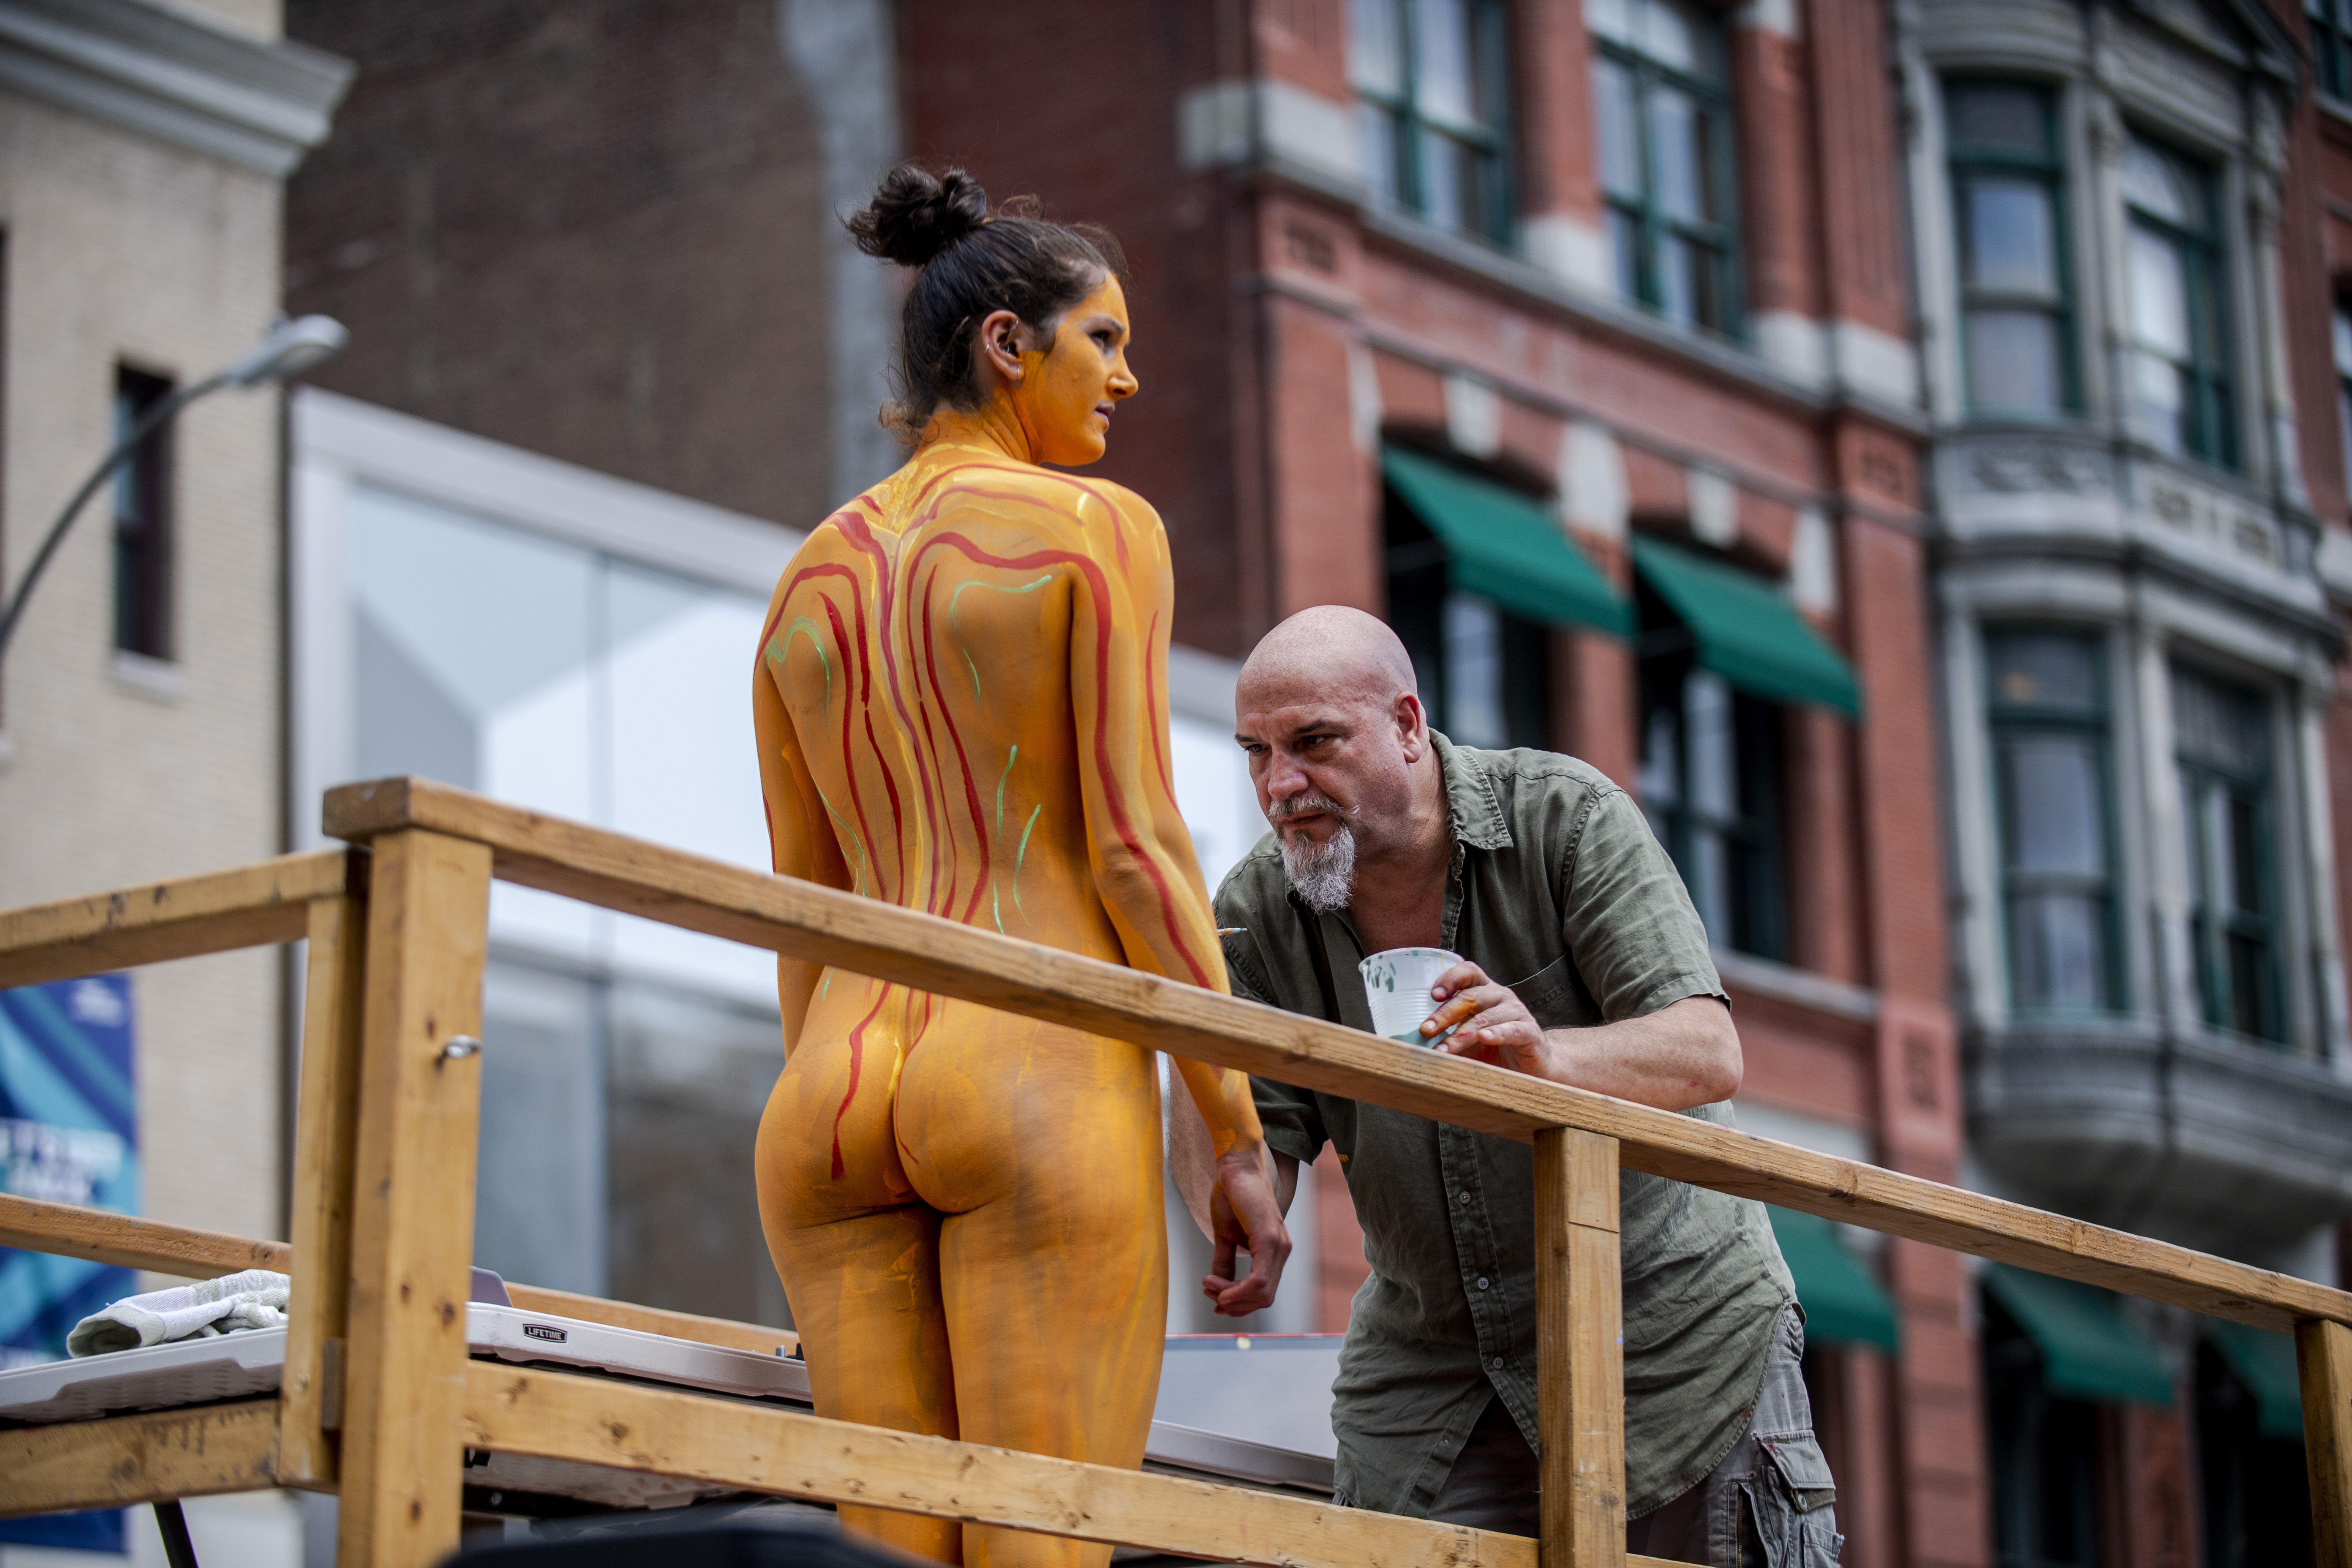 alaina hutchinson recommends public nude body painting pic